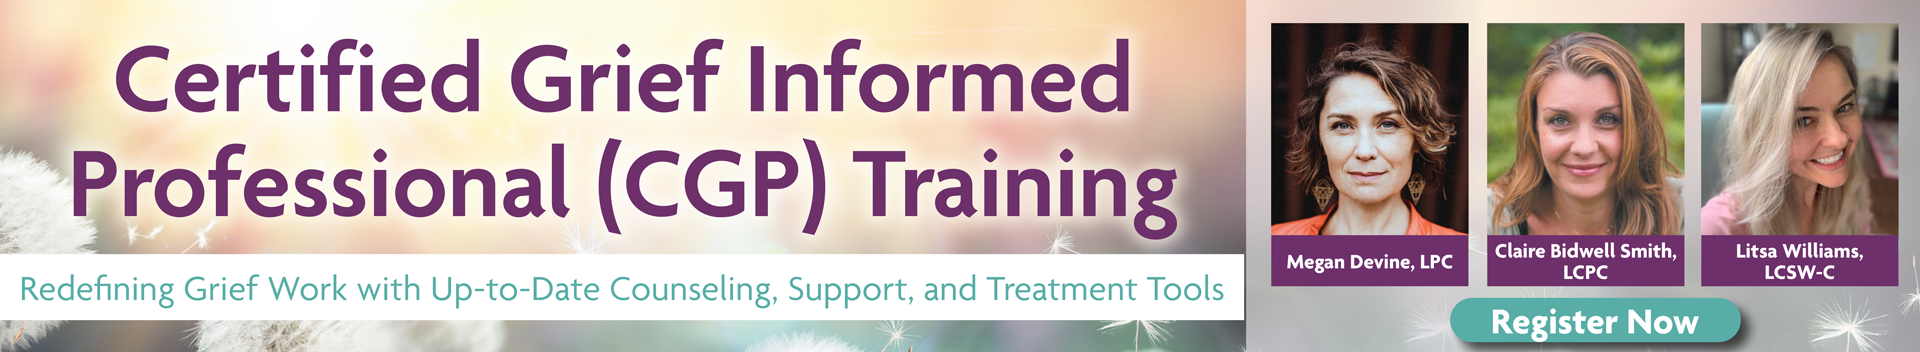 Certified Grief Informed Professional (CGP) Training